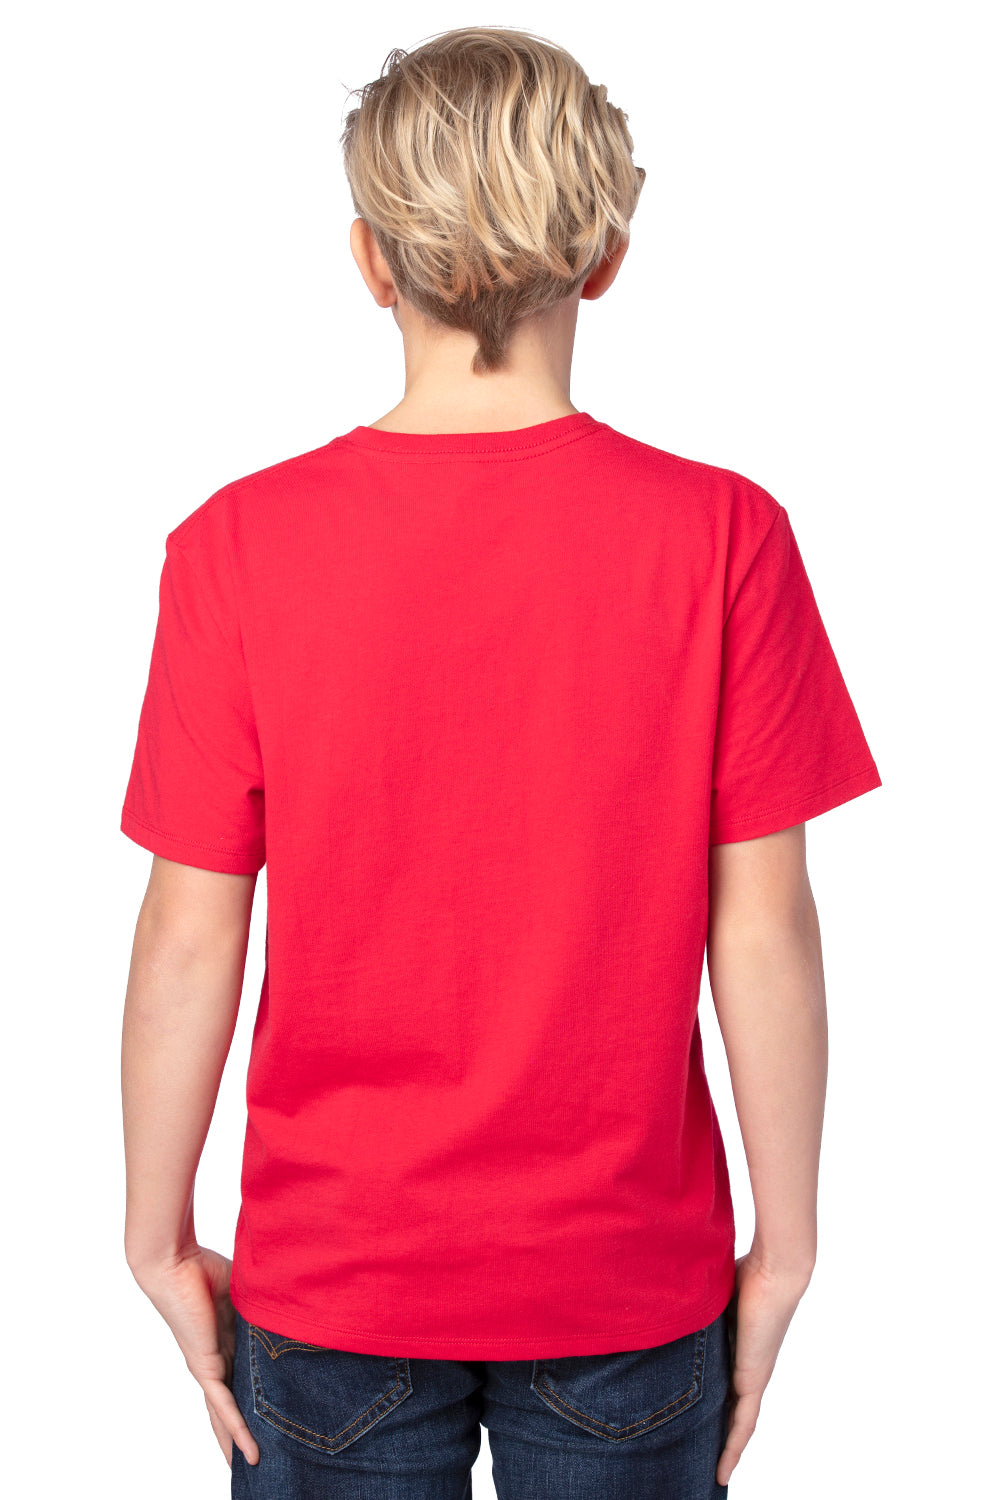 Threadfast Apparel 600A Youth Ultimate Short Sleeve Crewneck T-Shirt Red Back